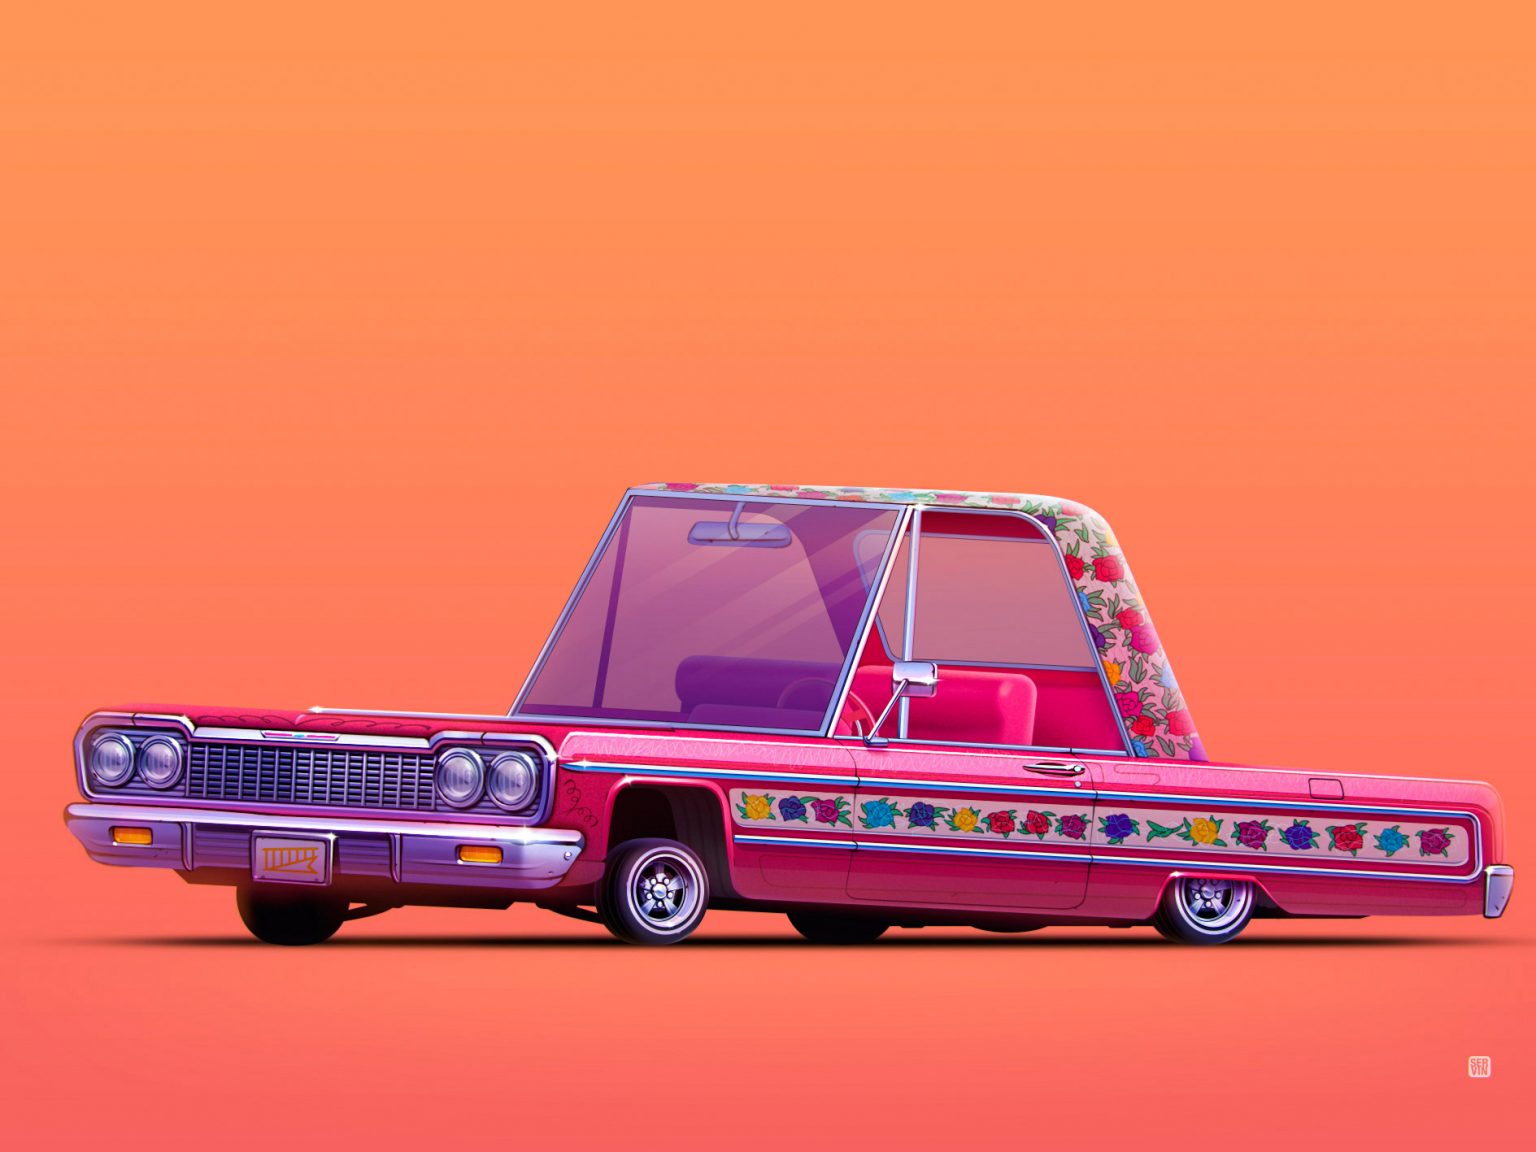 Iconic Vehicles: Illustrations by Servin Seidaliev | Daily design ...